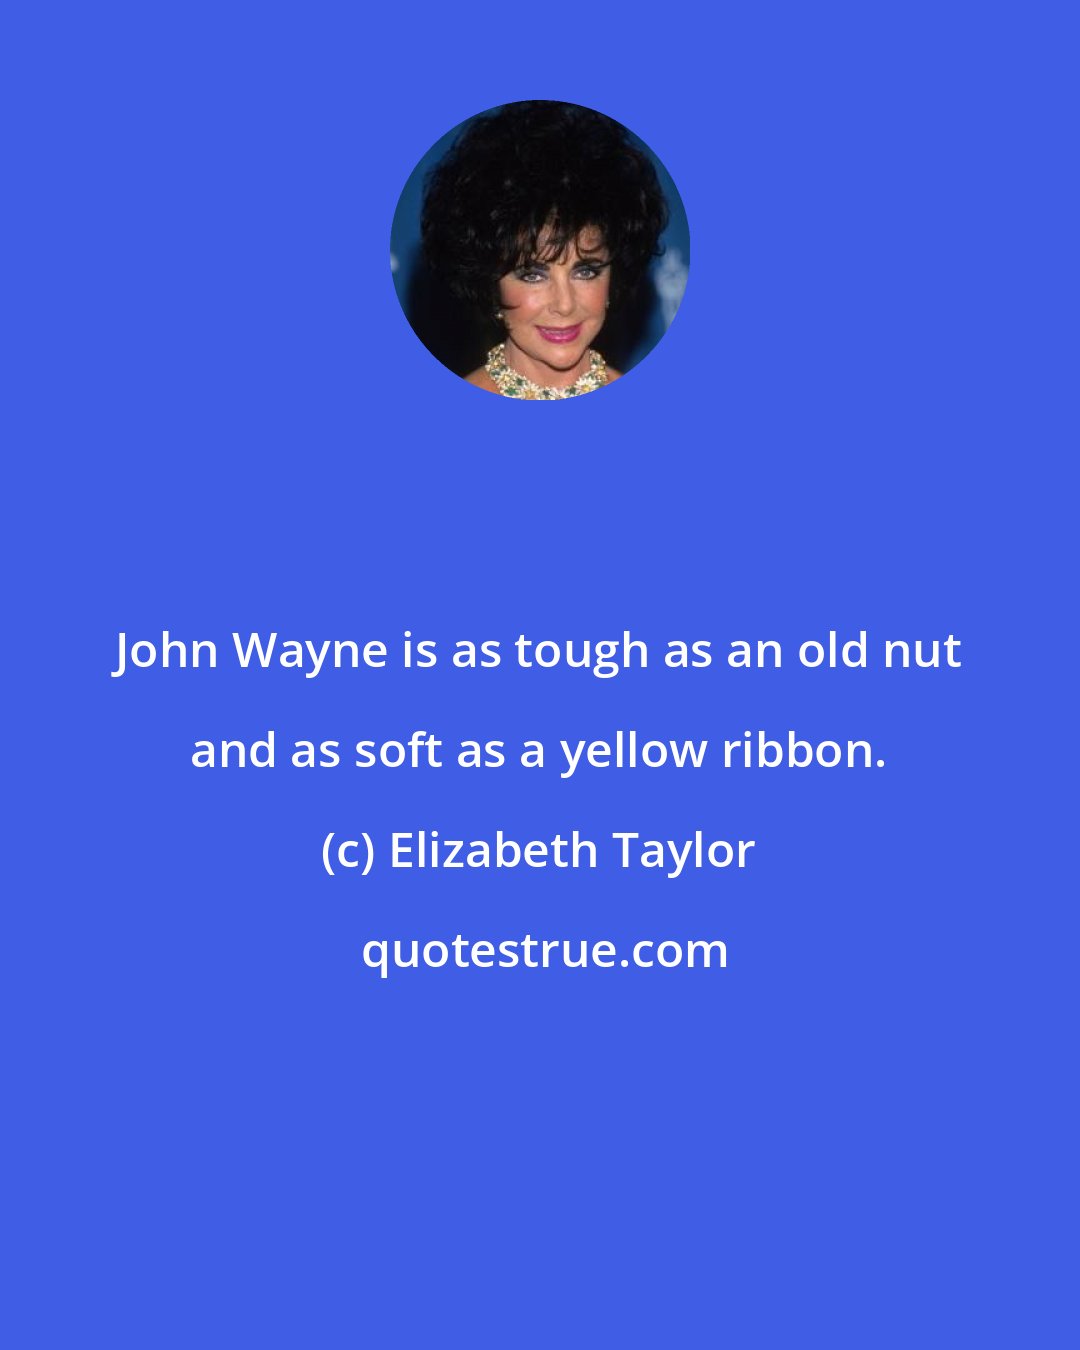 Elizabeth Taylor: John Wayne is as tough as an old nut and as soft as a yellow ribbon.